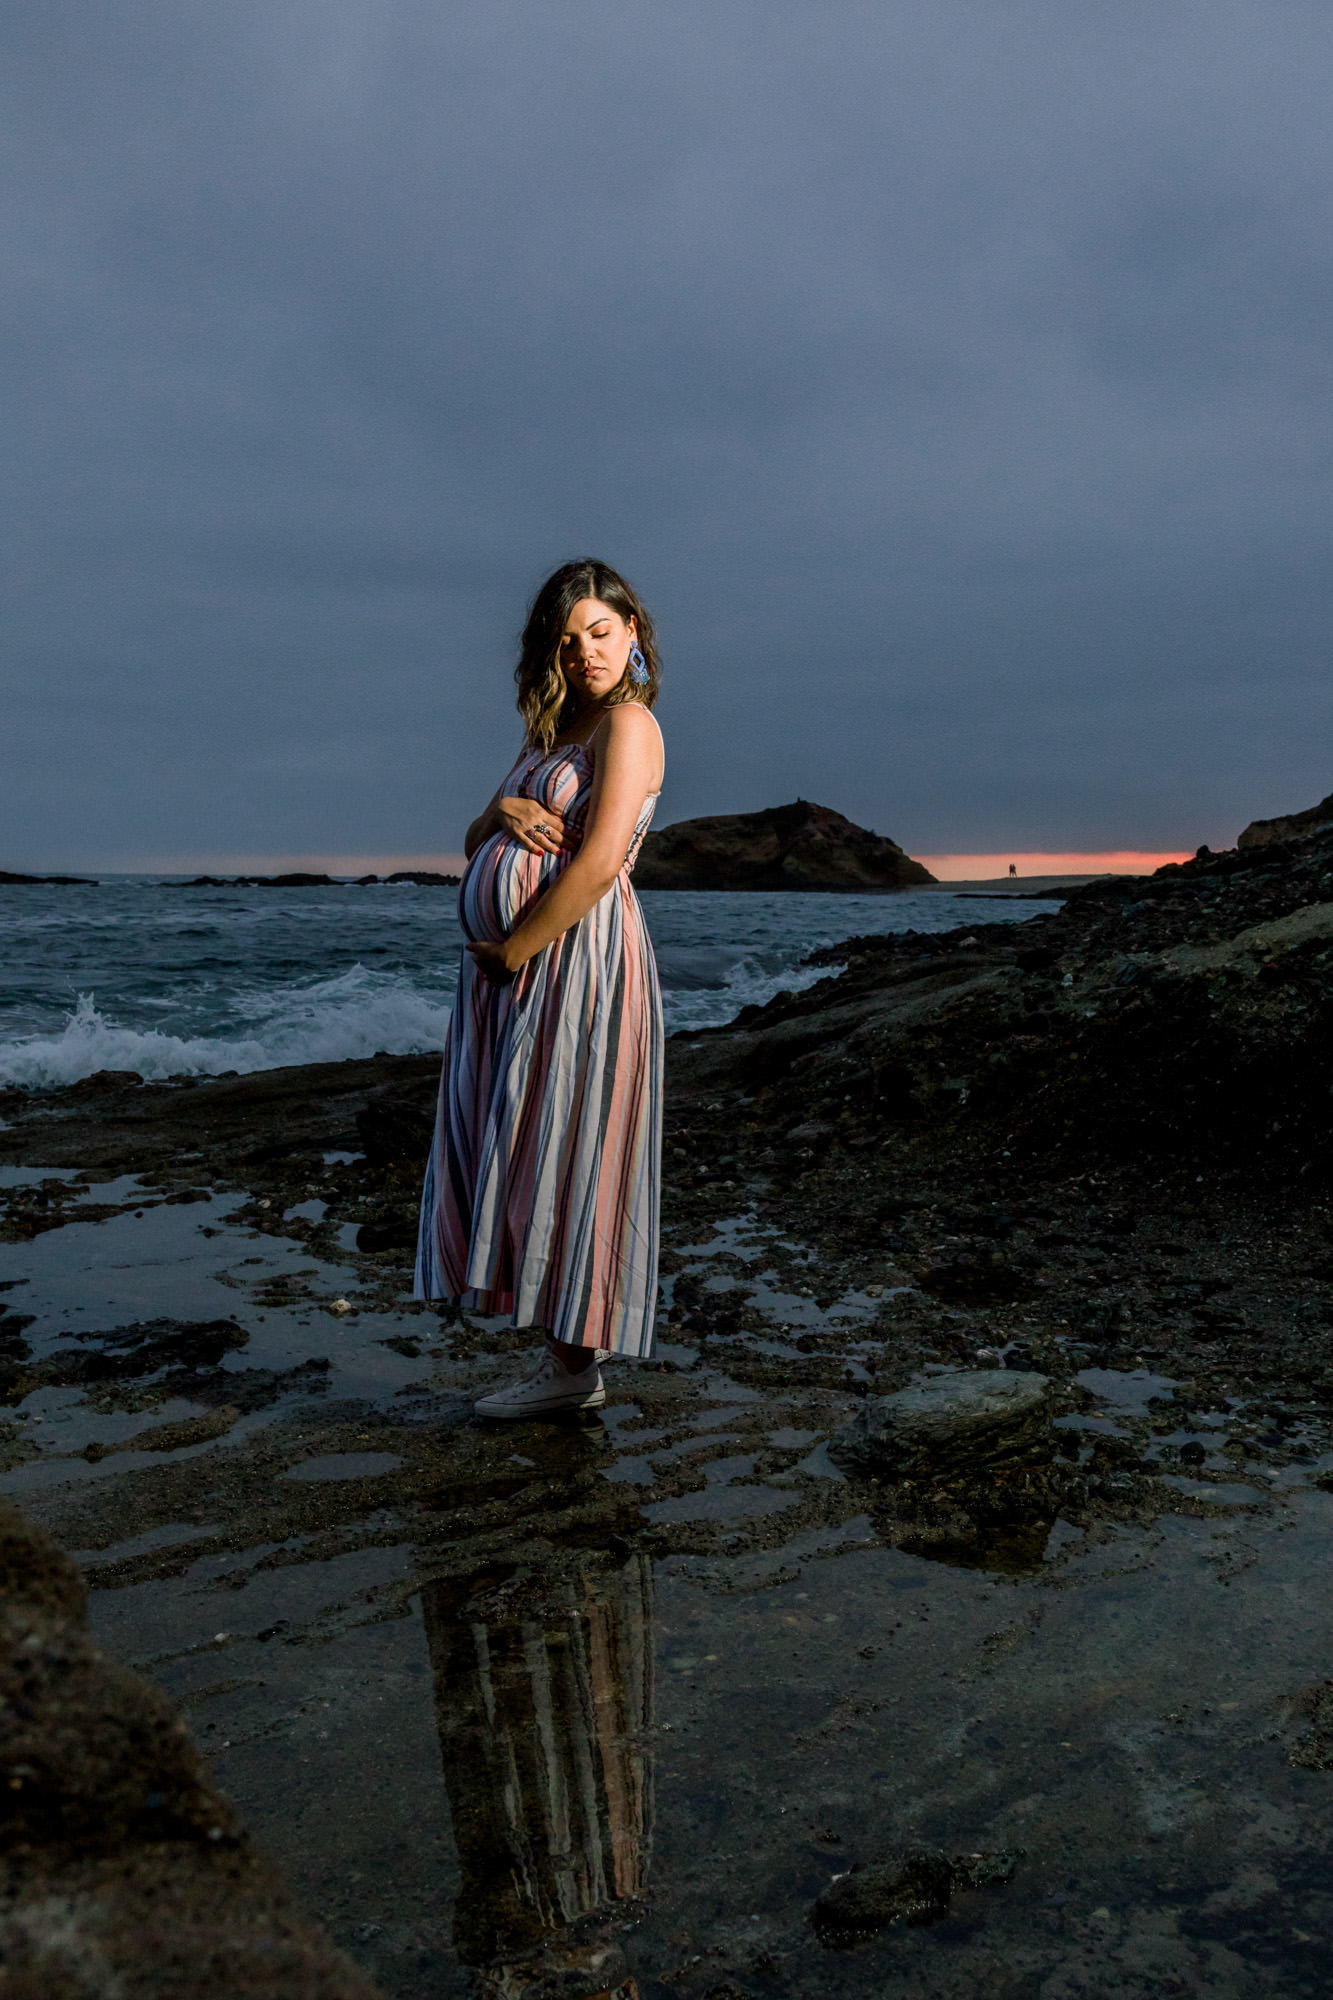 Mom to be poses on the rocks at  the  beach at night holding her belly